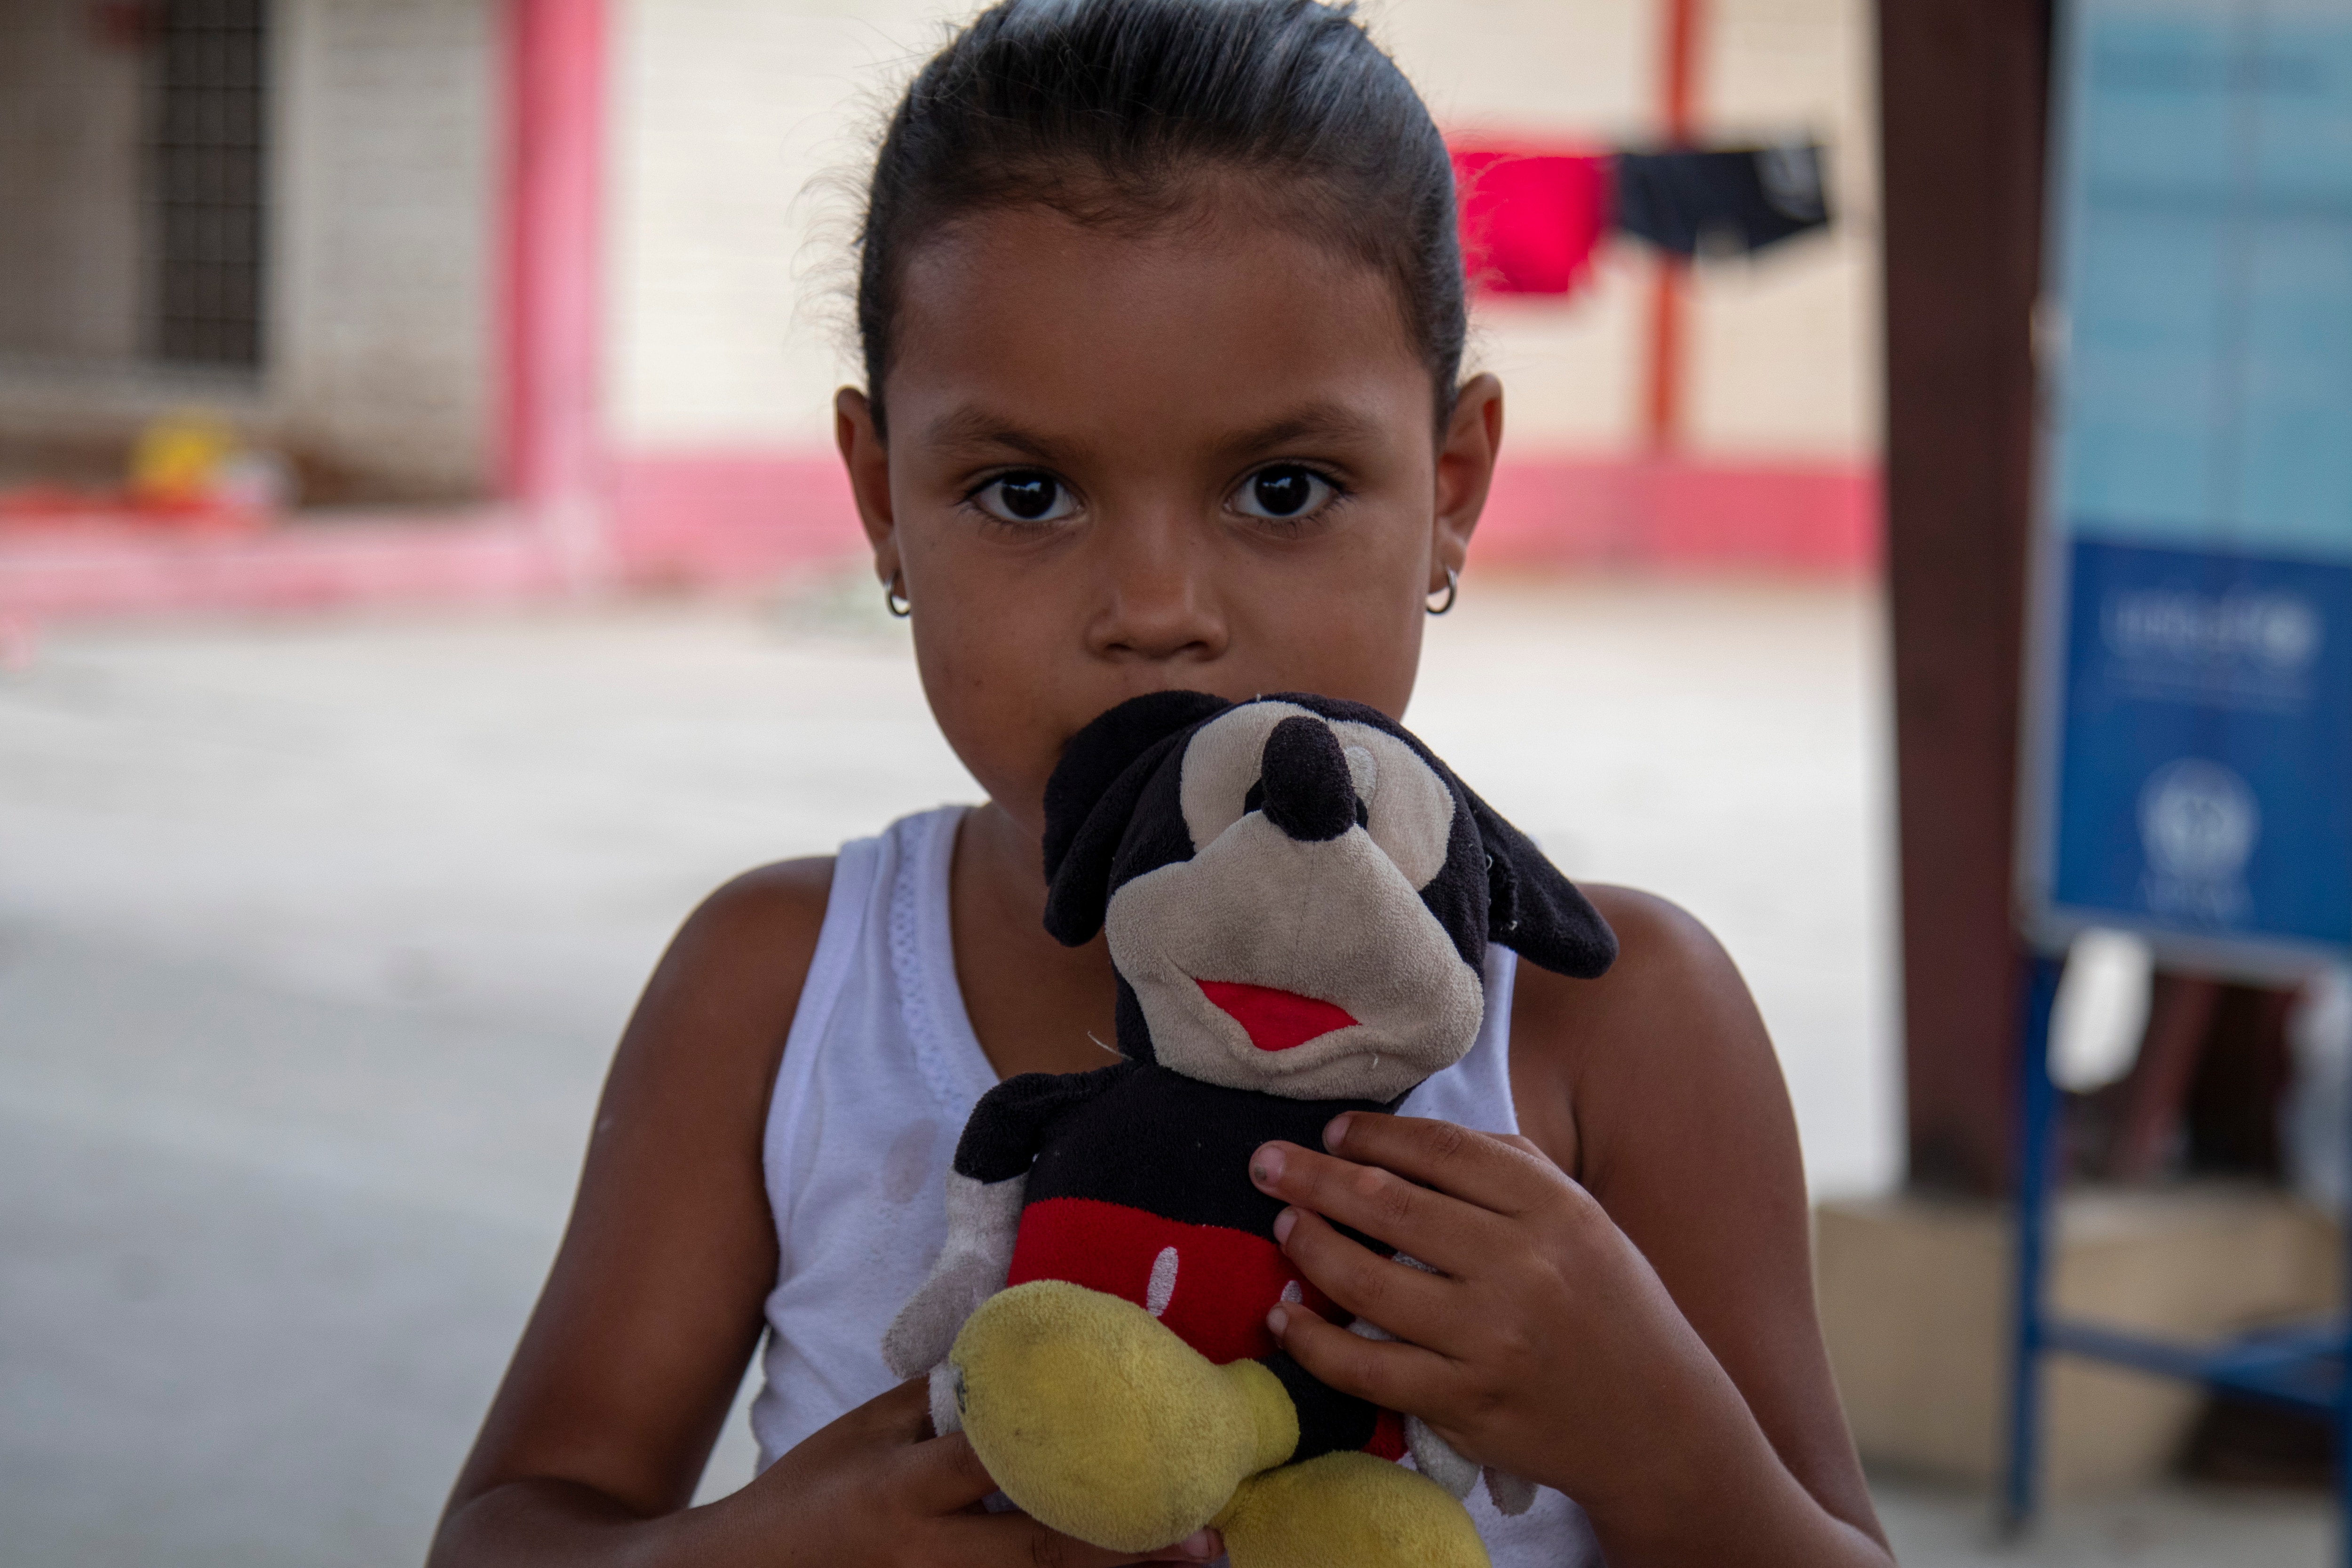 Five-year-old Ami travelled almost 3,000 kilometers to reach Venezuela's border with Peru.